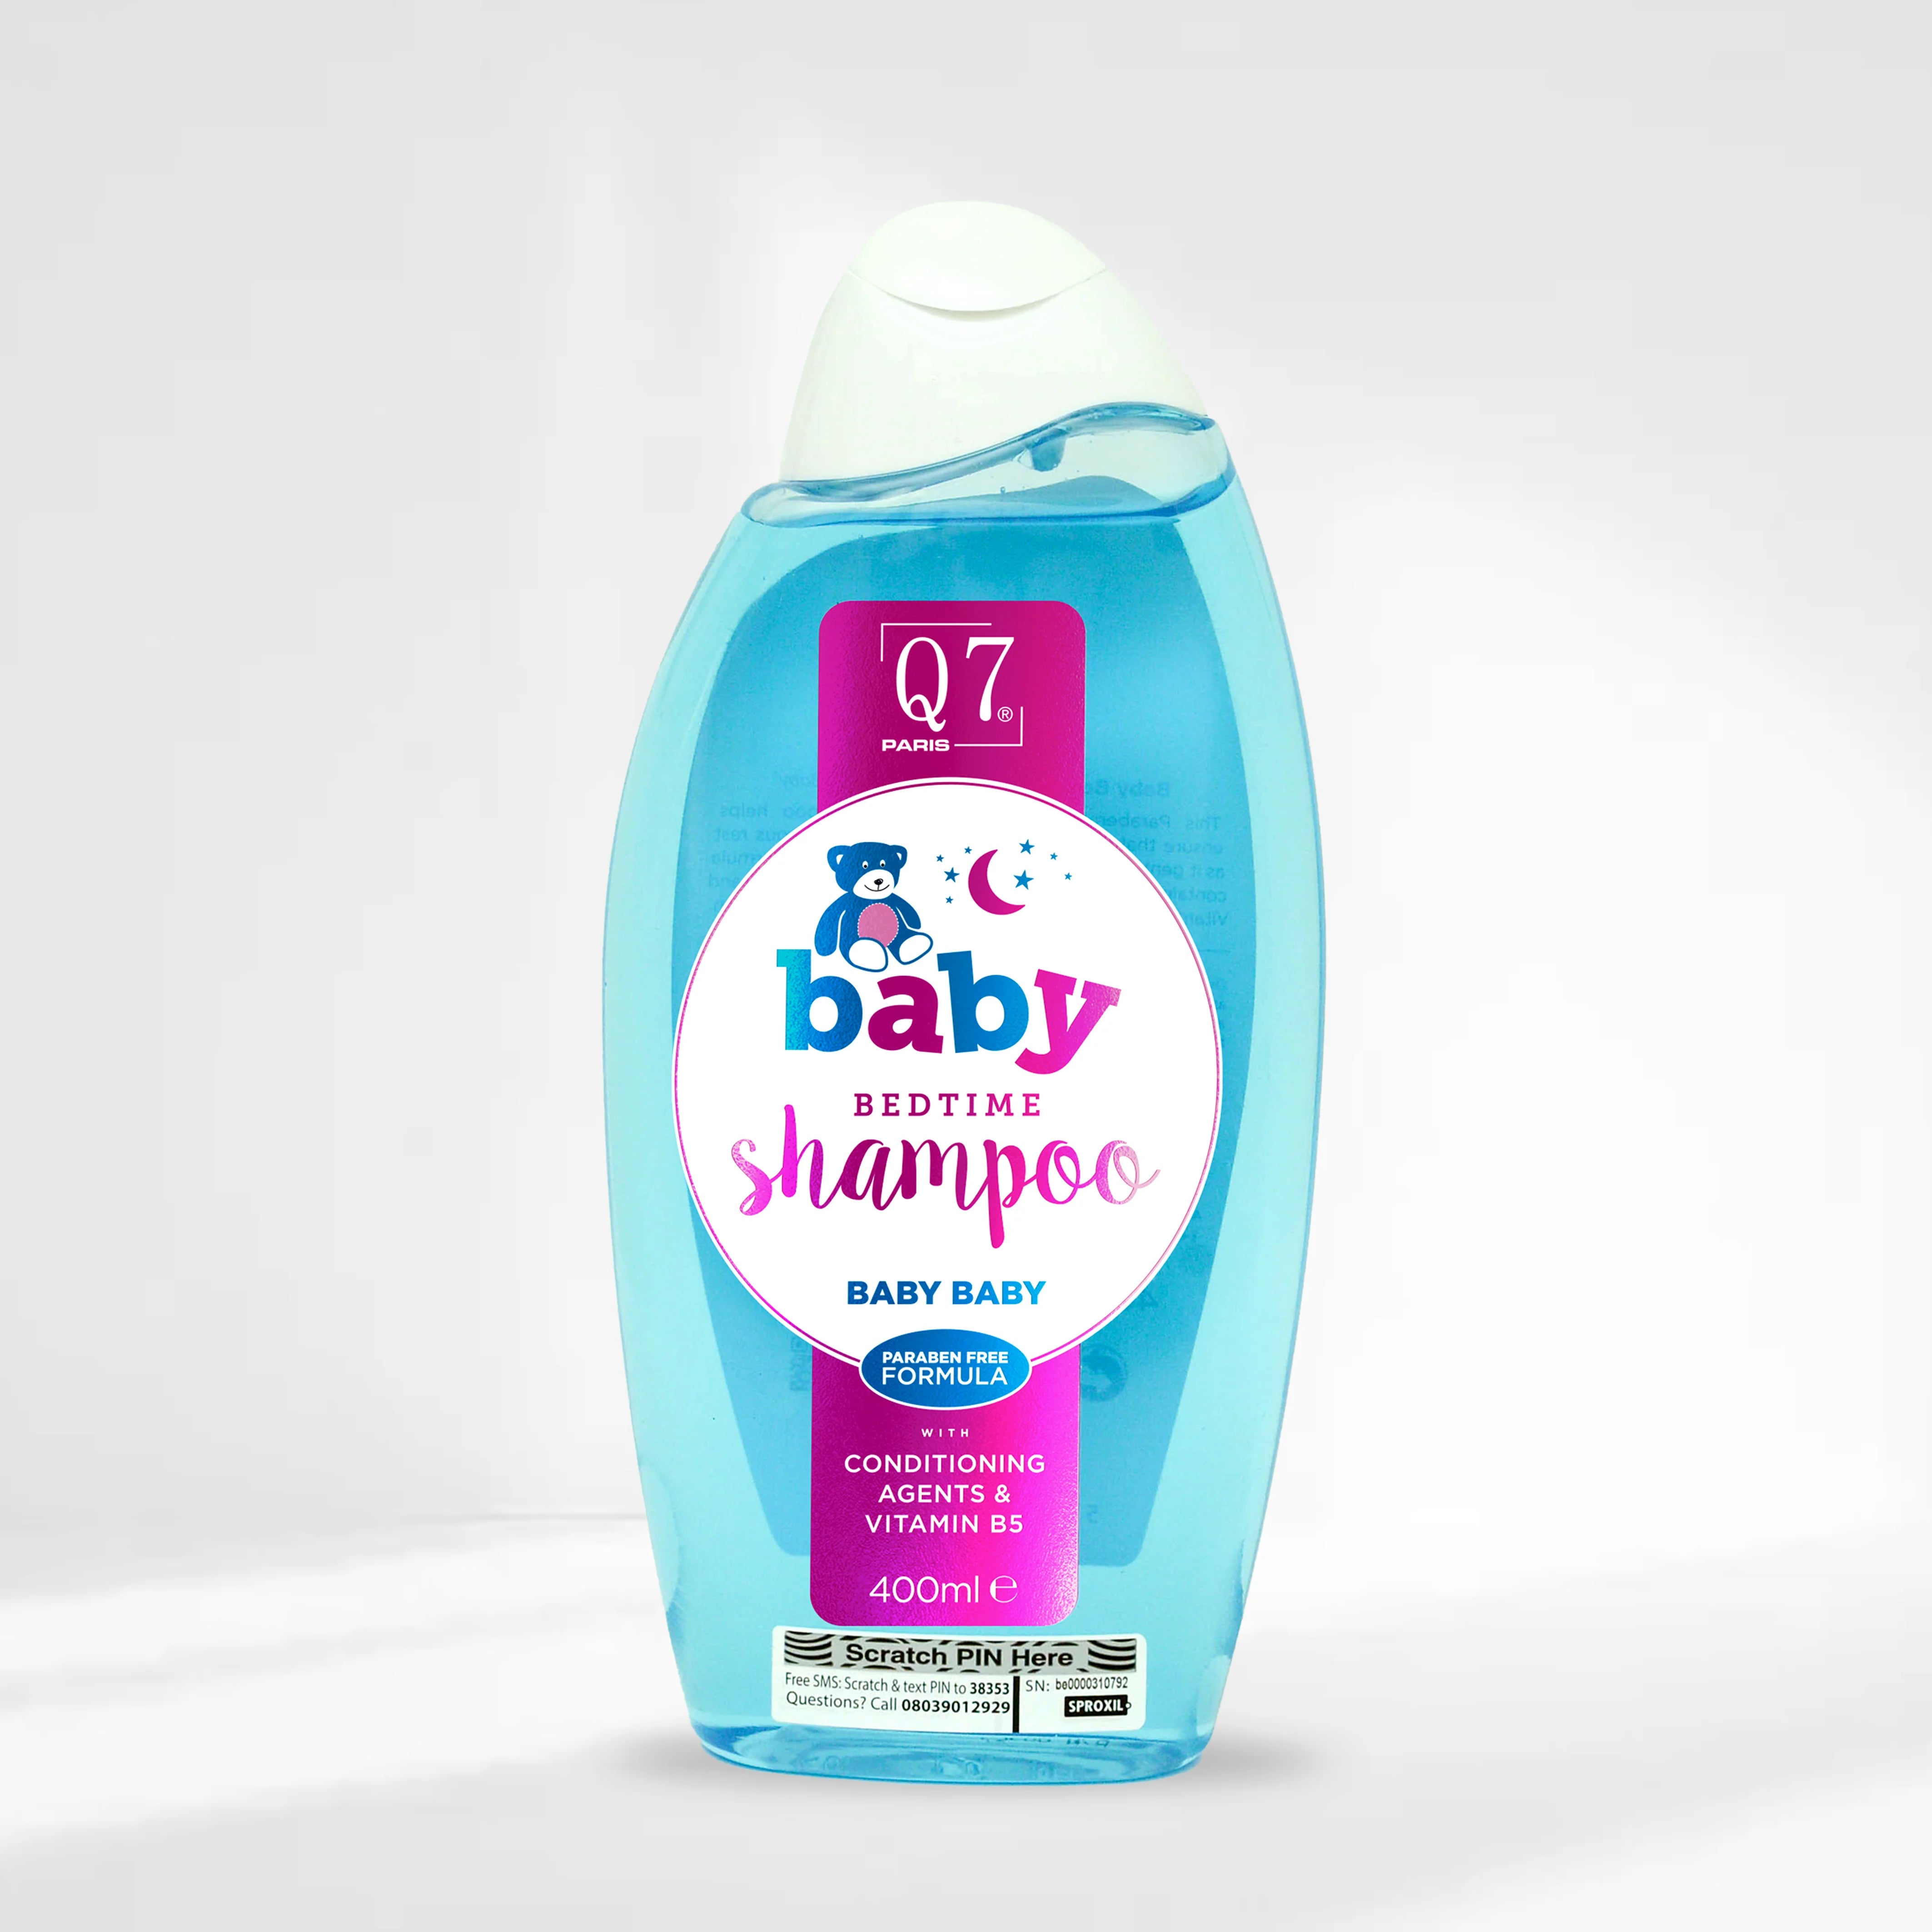 Q7Paris Baby Bedtime Shampoo ('BabyBaby'): with conditioning agents and Vitamin B5 - 400ml